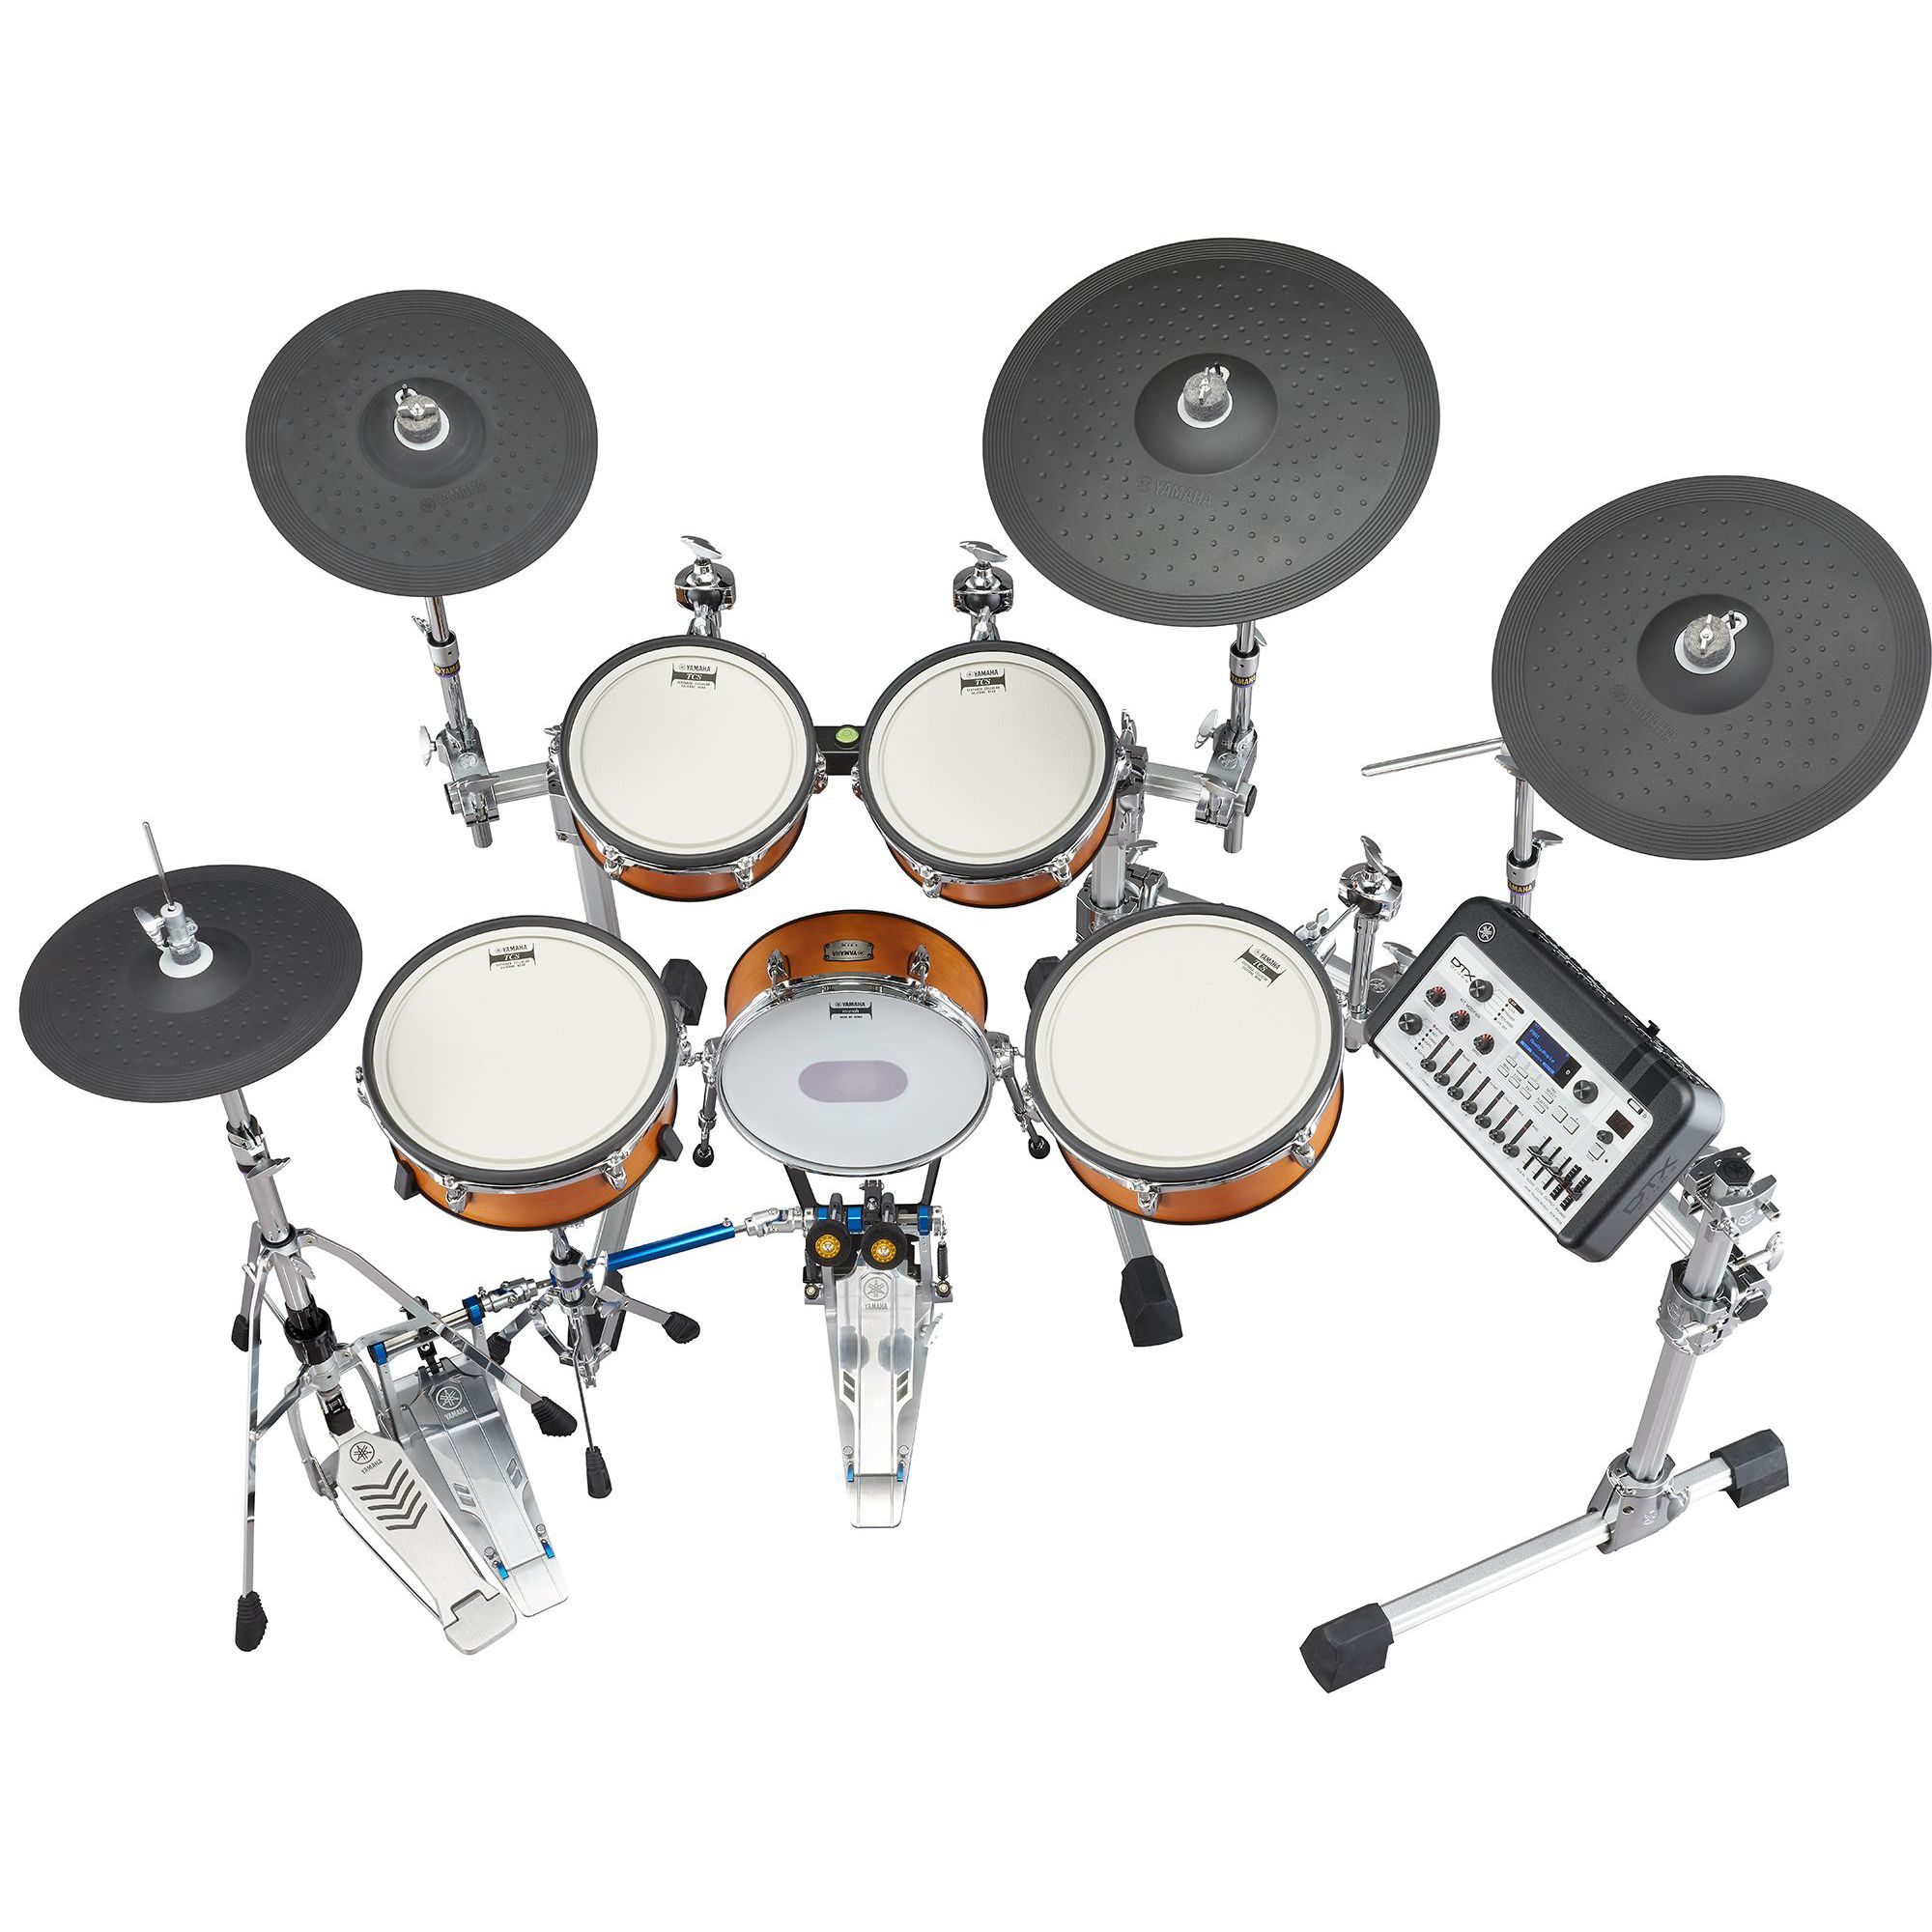 DTX10 Series Electronic Drum Kit Products - Yamaha USA